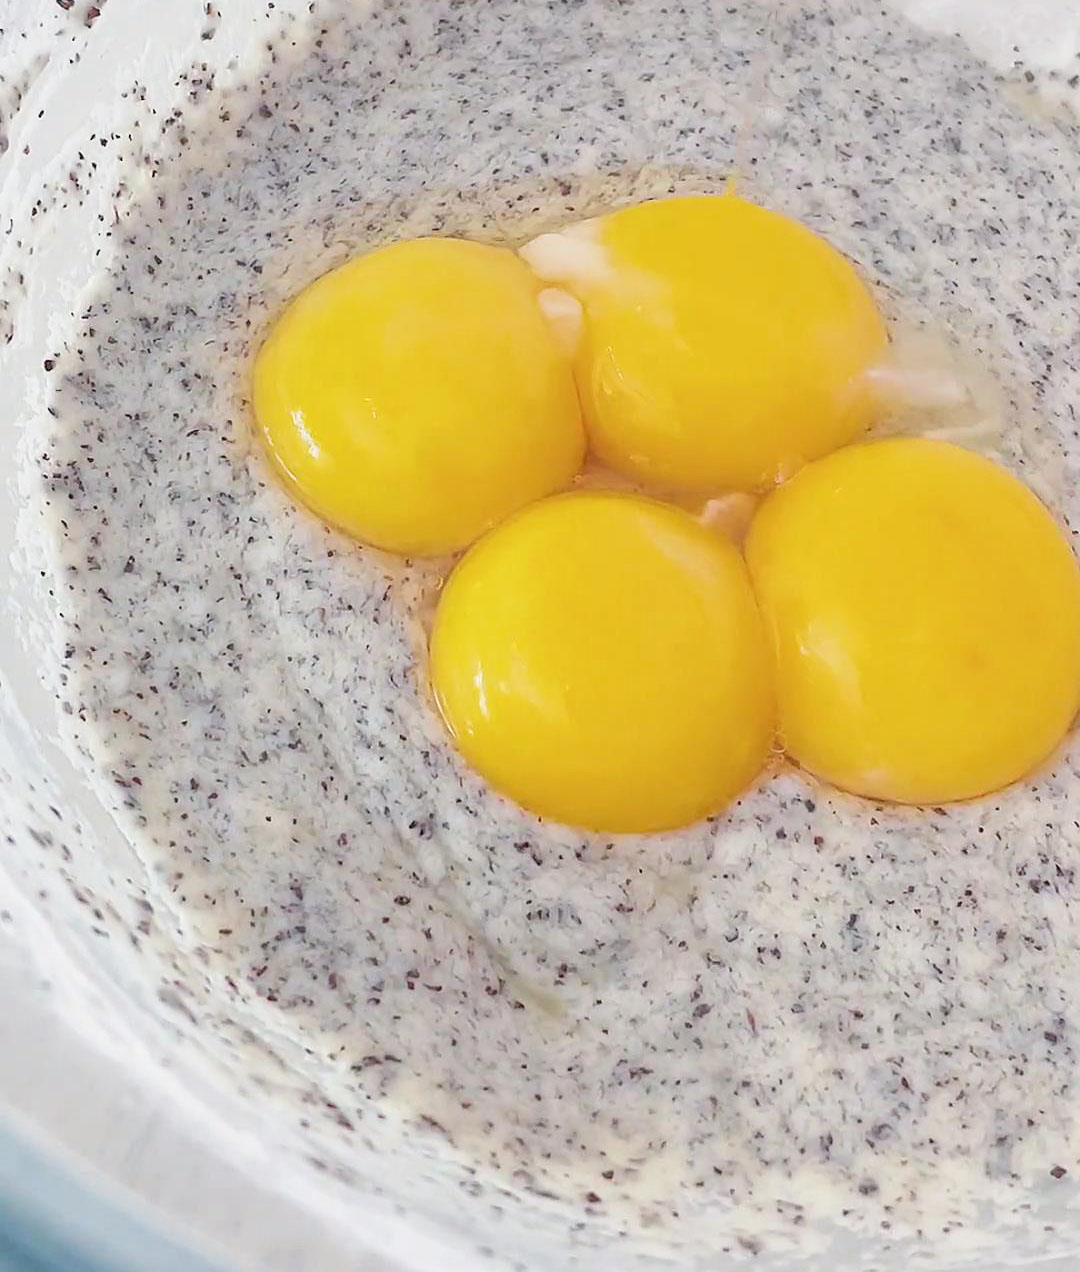 Add 4 egg yolks to the batter and whisk in a Z shaped motion